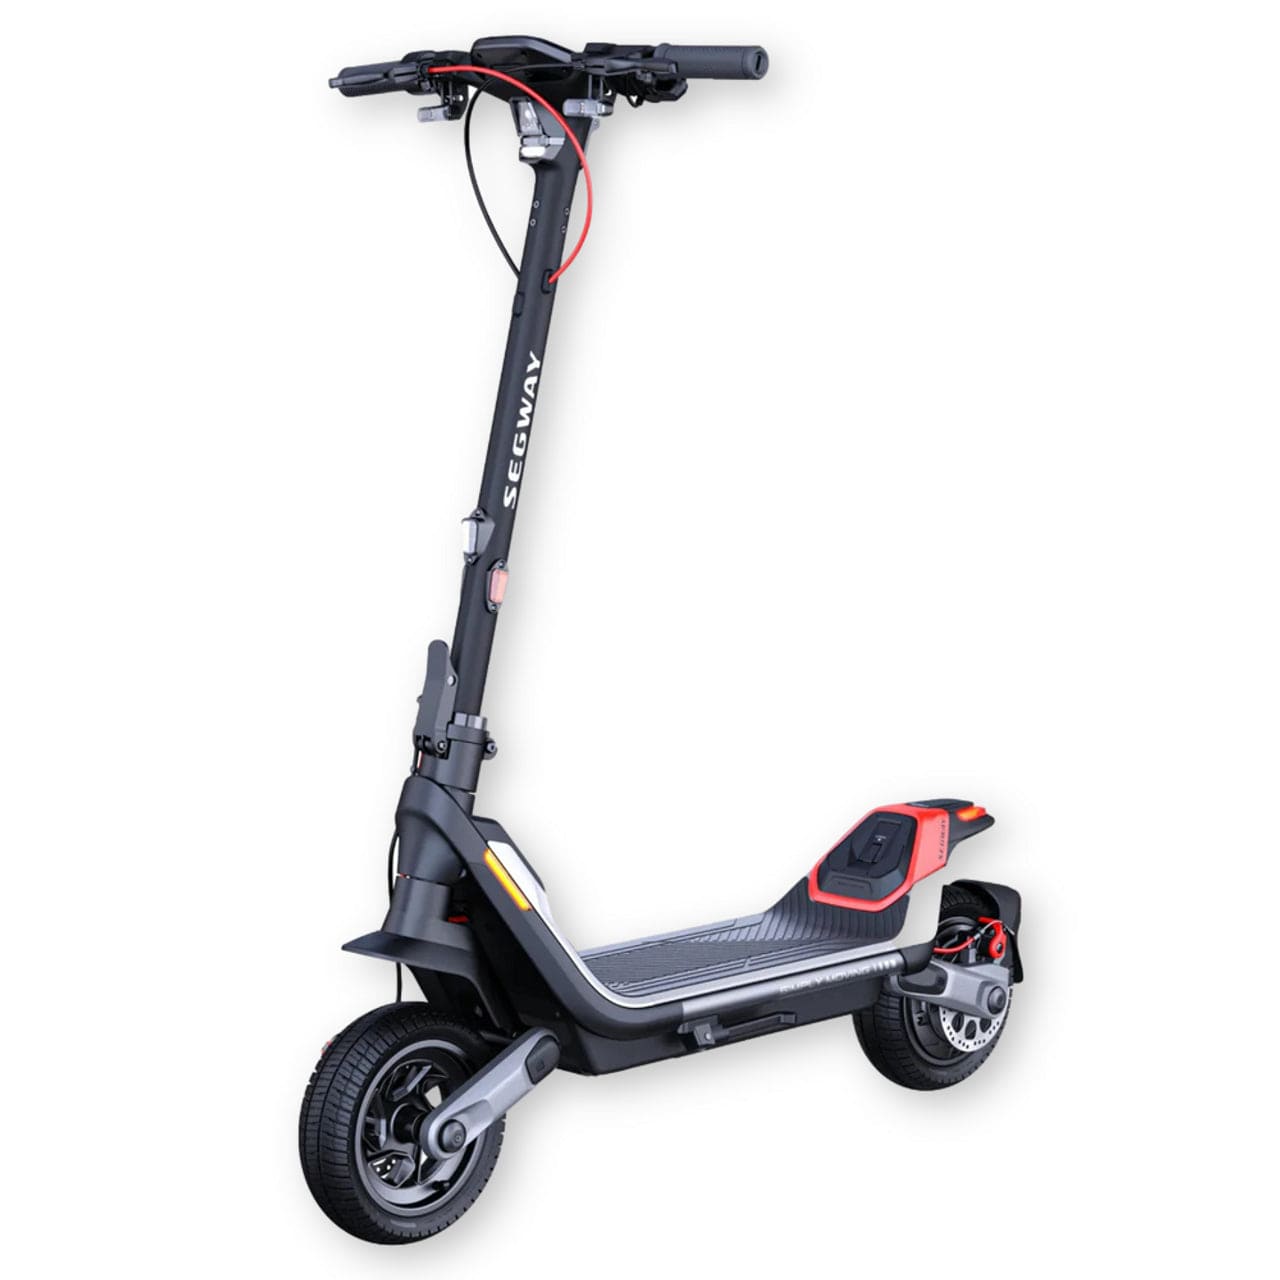 Segway Ninebot Max G30, One of the most loved e-scooter